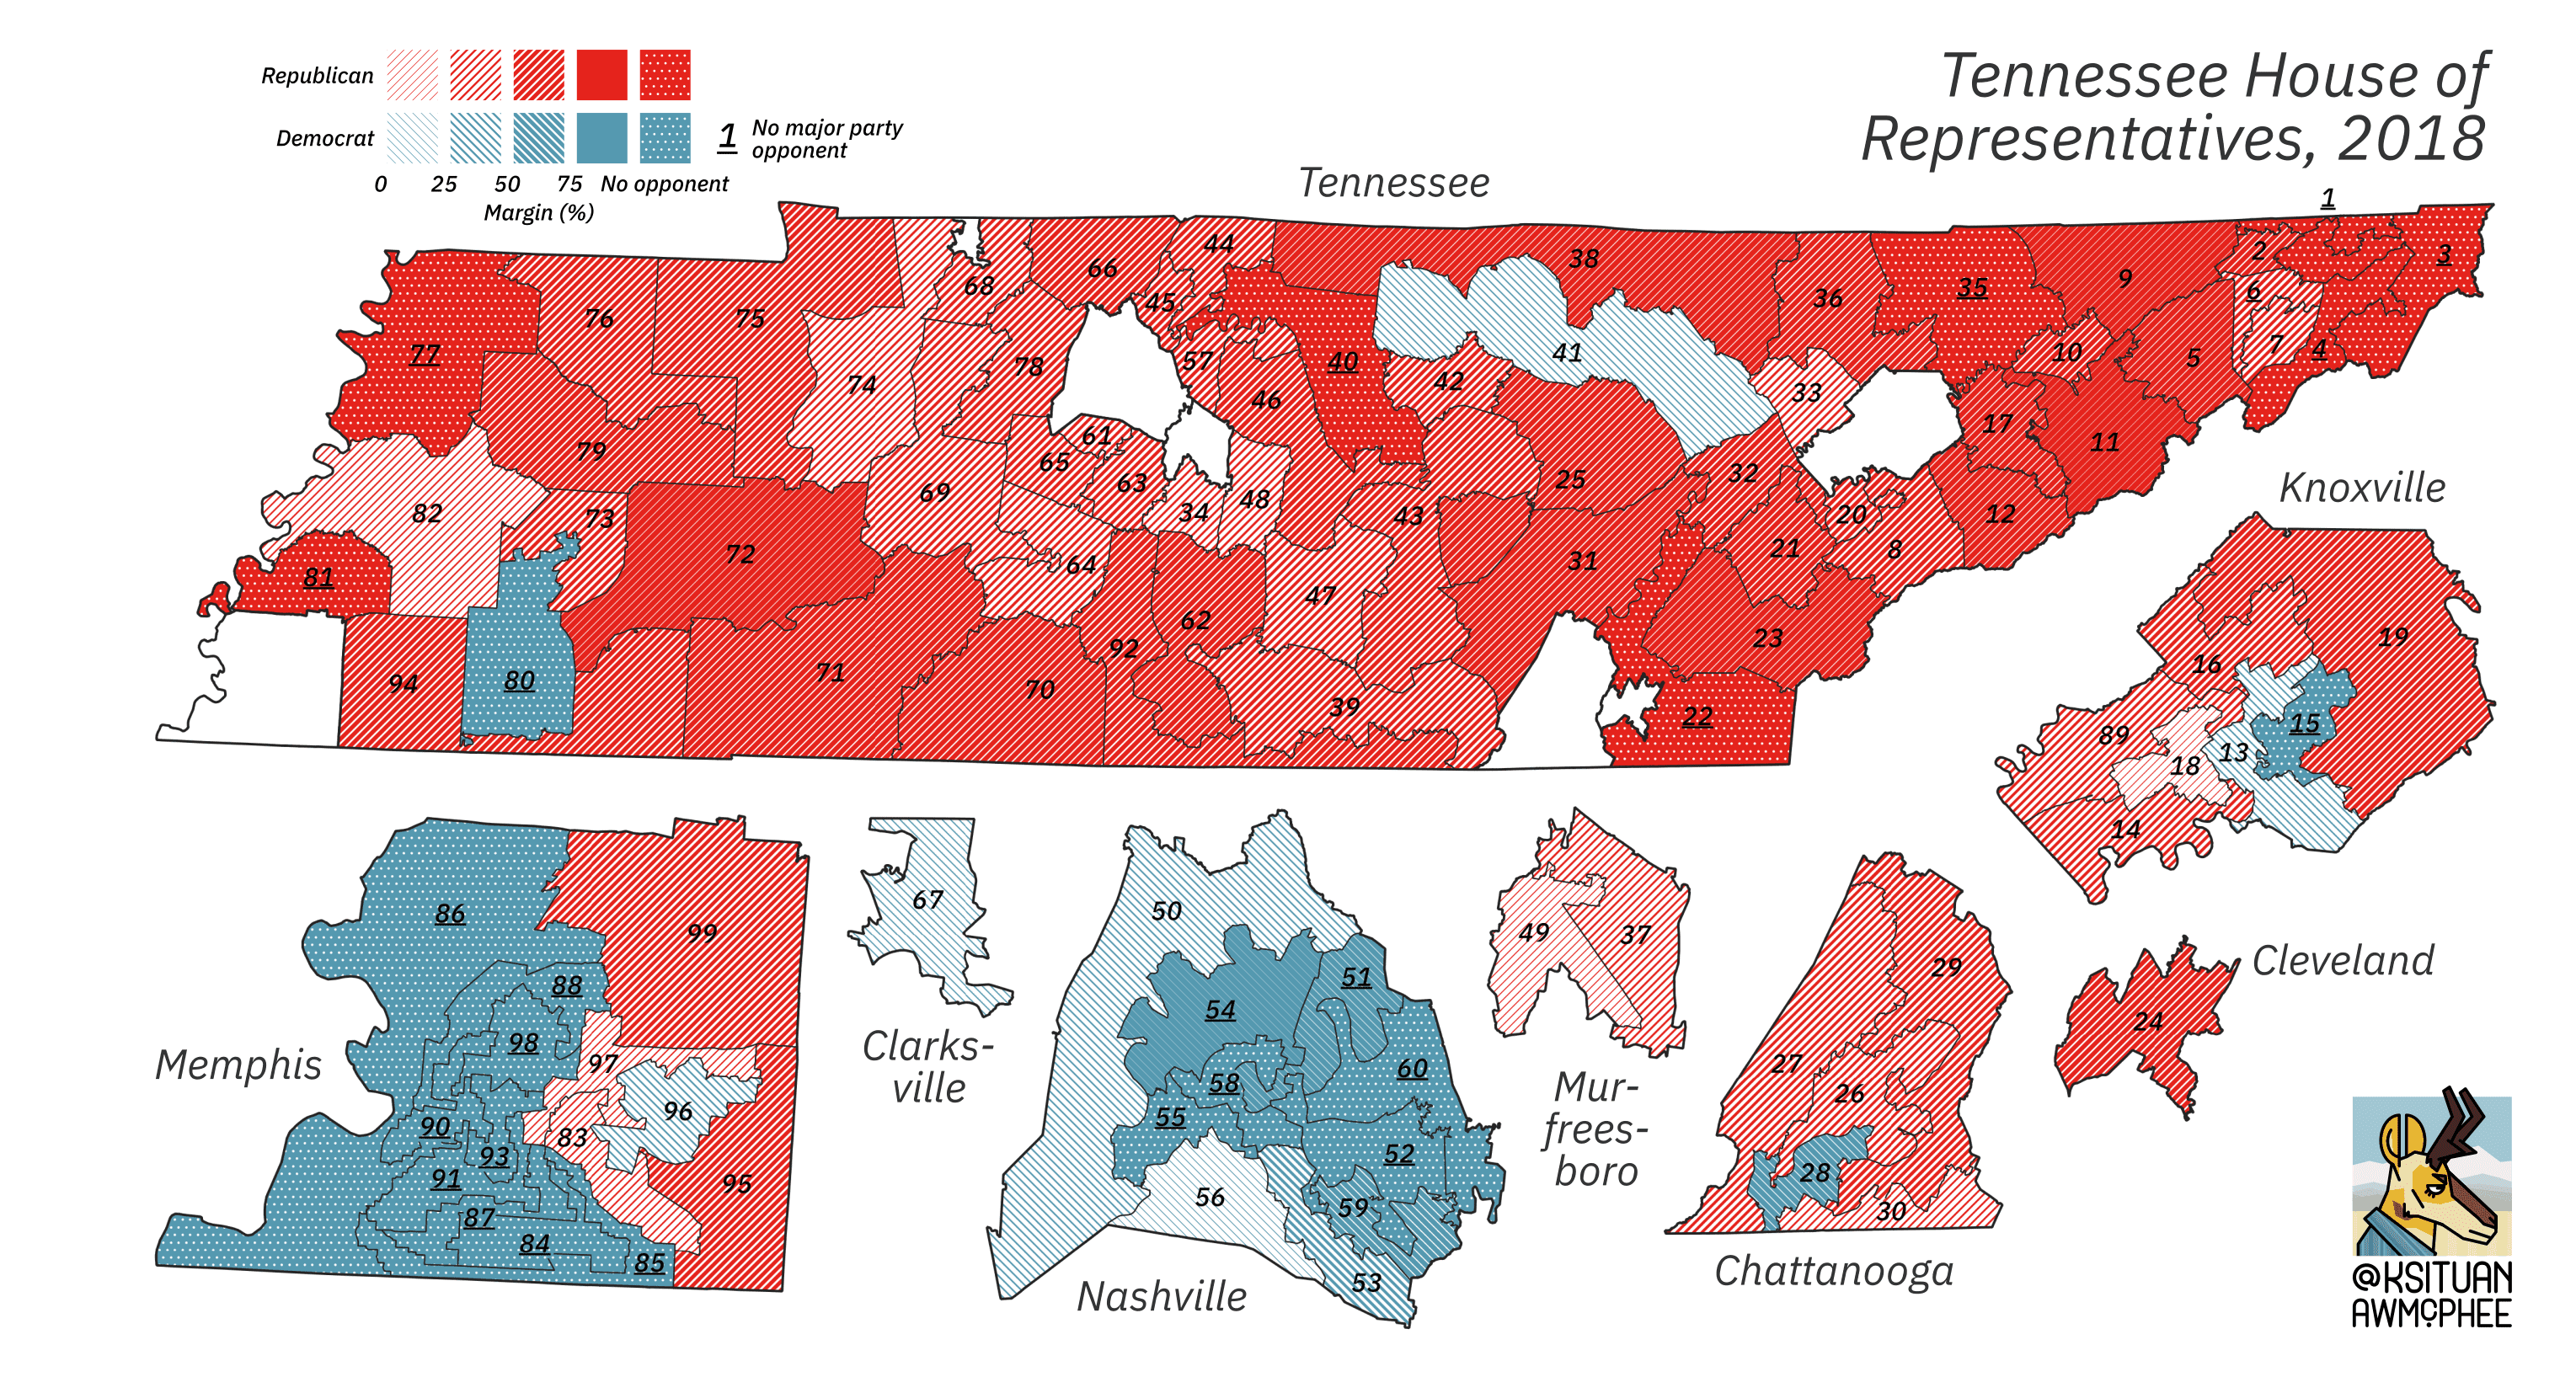 A political map of Tennessee.